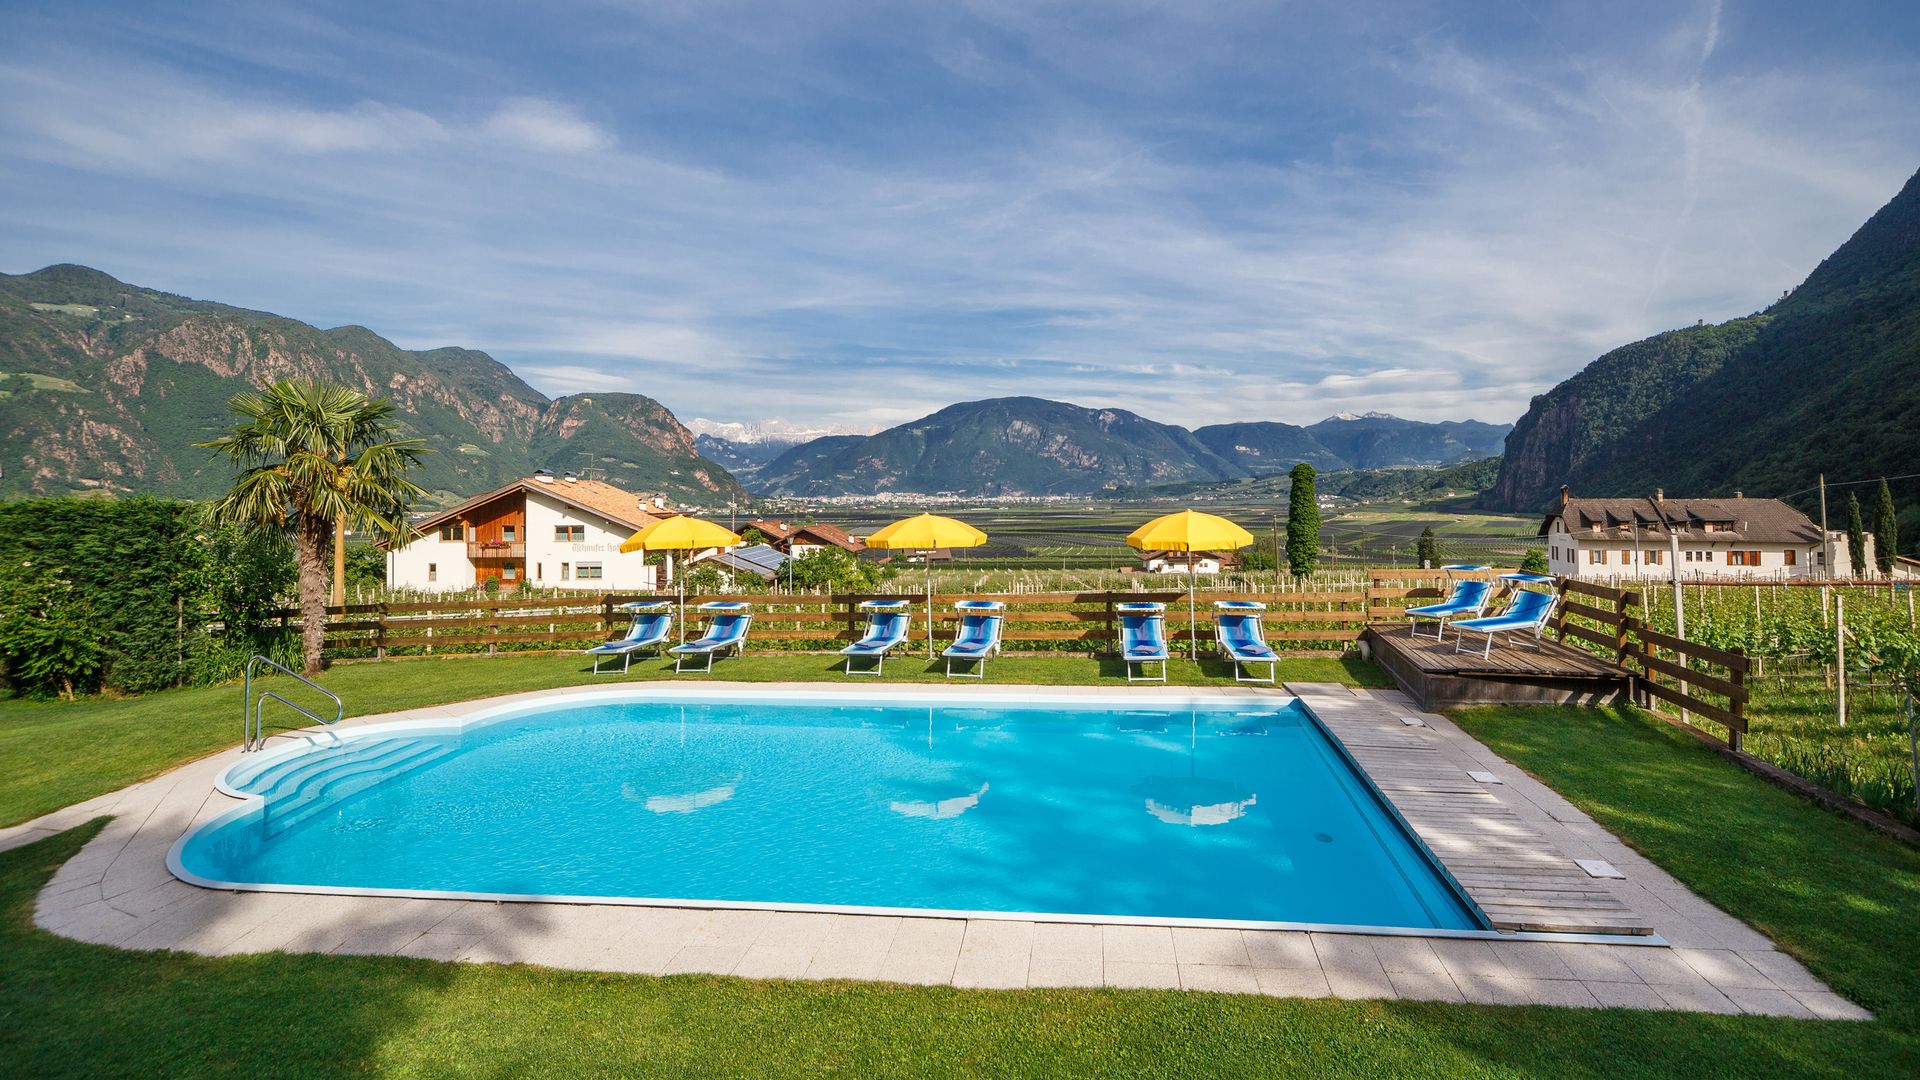 Accommodation, South Tyrol, outdoor pool